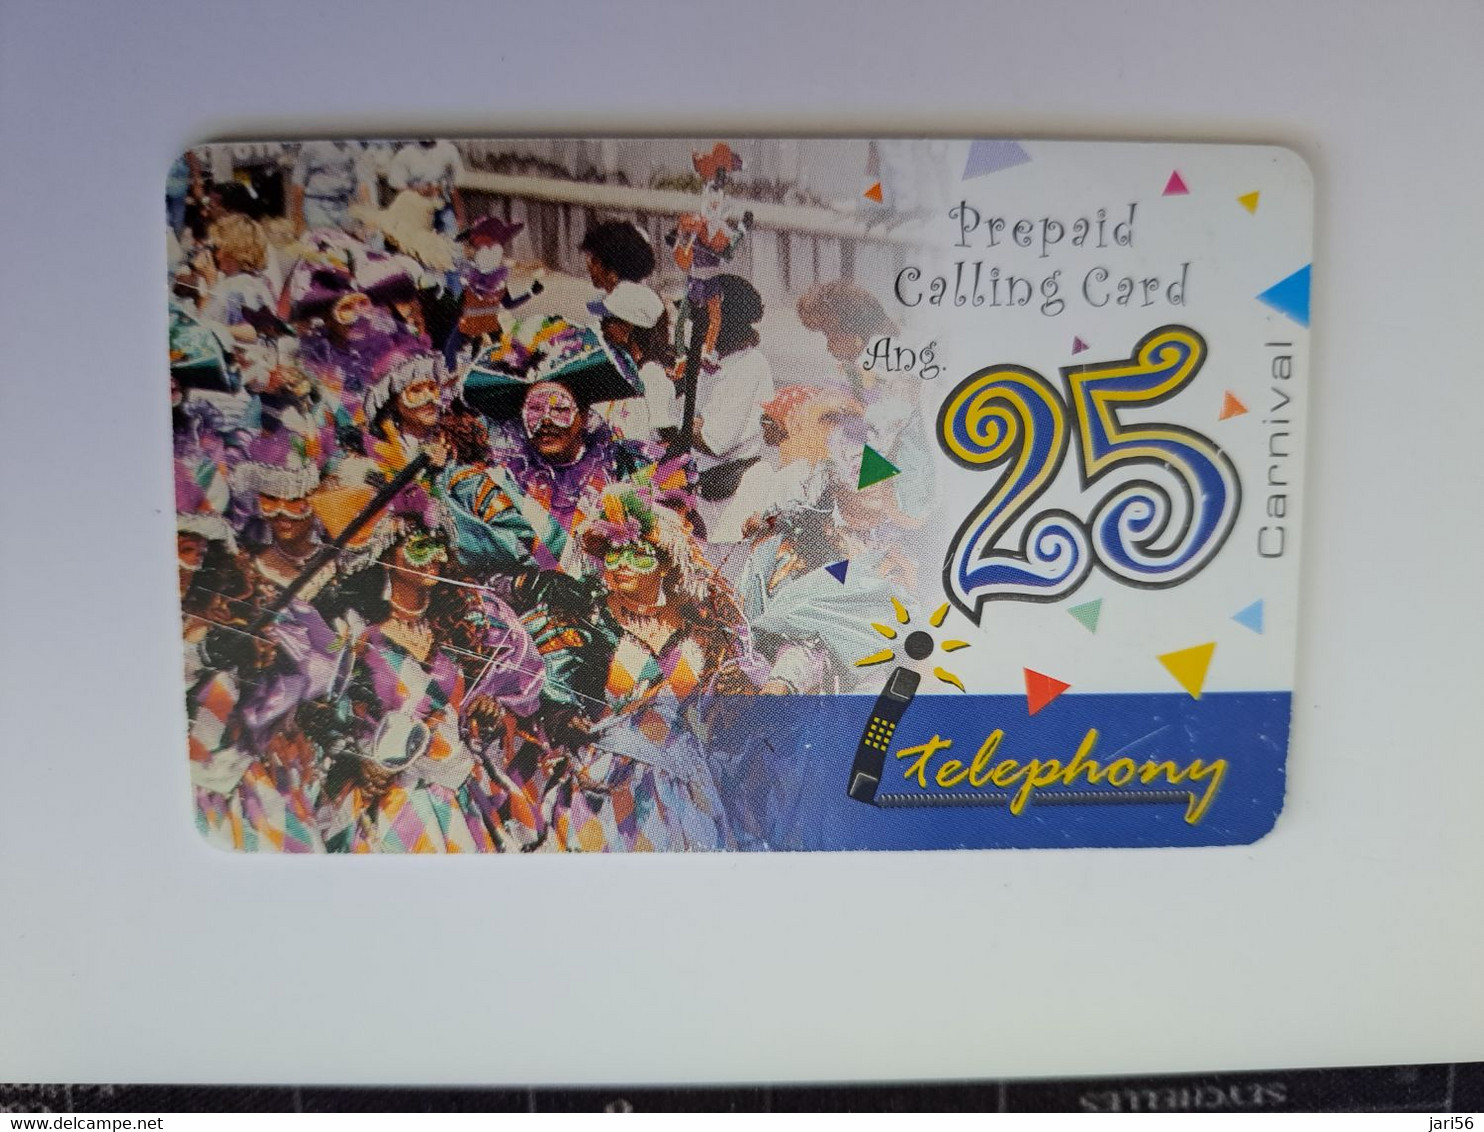 CURACAO NAF 25,-   BELKAART / I TELEPHONY / CARNIVAL /   THICK CARD   USED CARD     ** 11338** - Antillas (Nerlandesas)